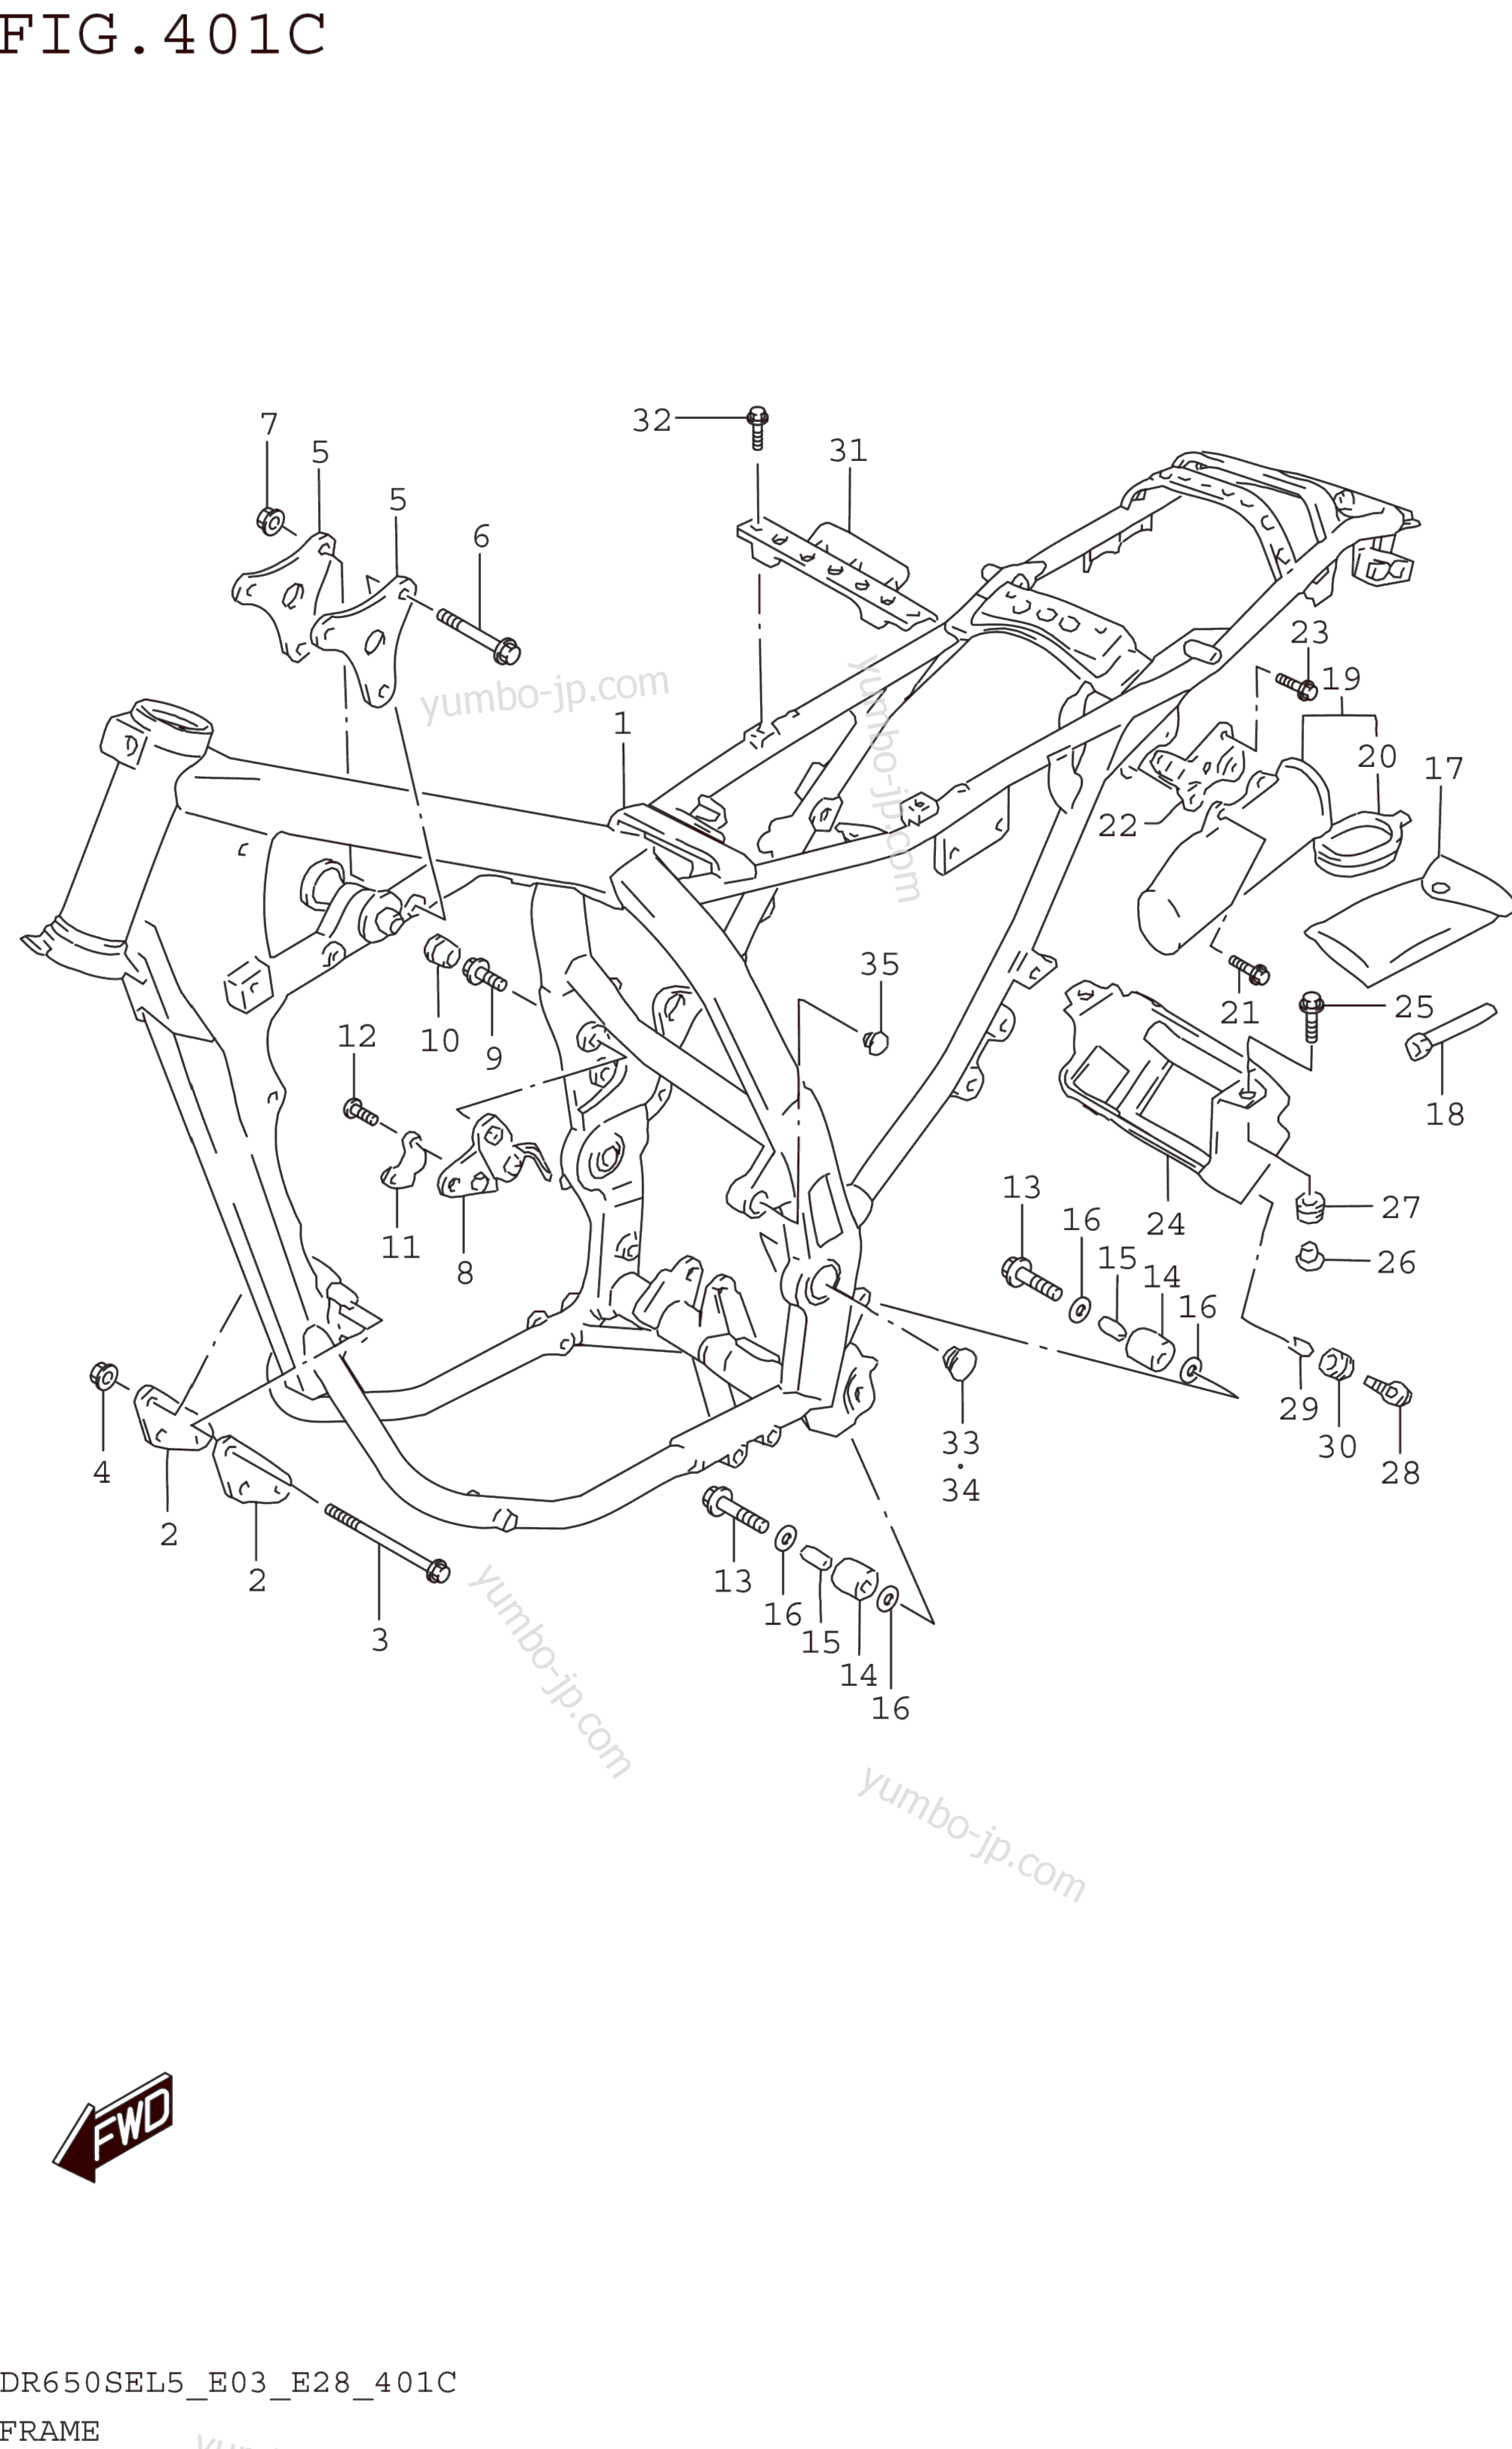 FRAME (DR650SEL5 E33) for motorcycles SUZUKI DR650SE 2015 year